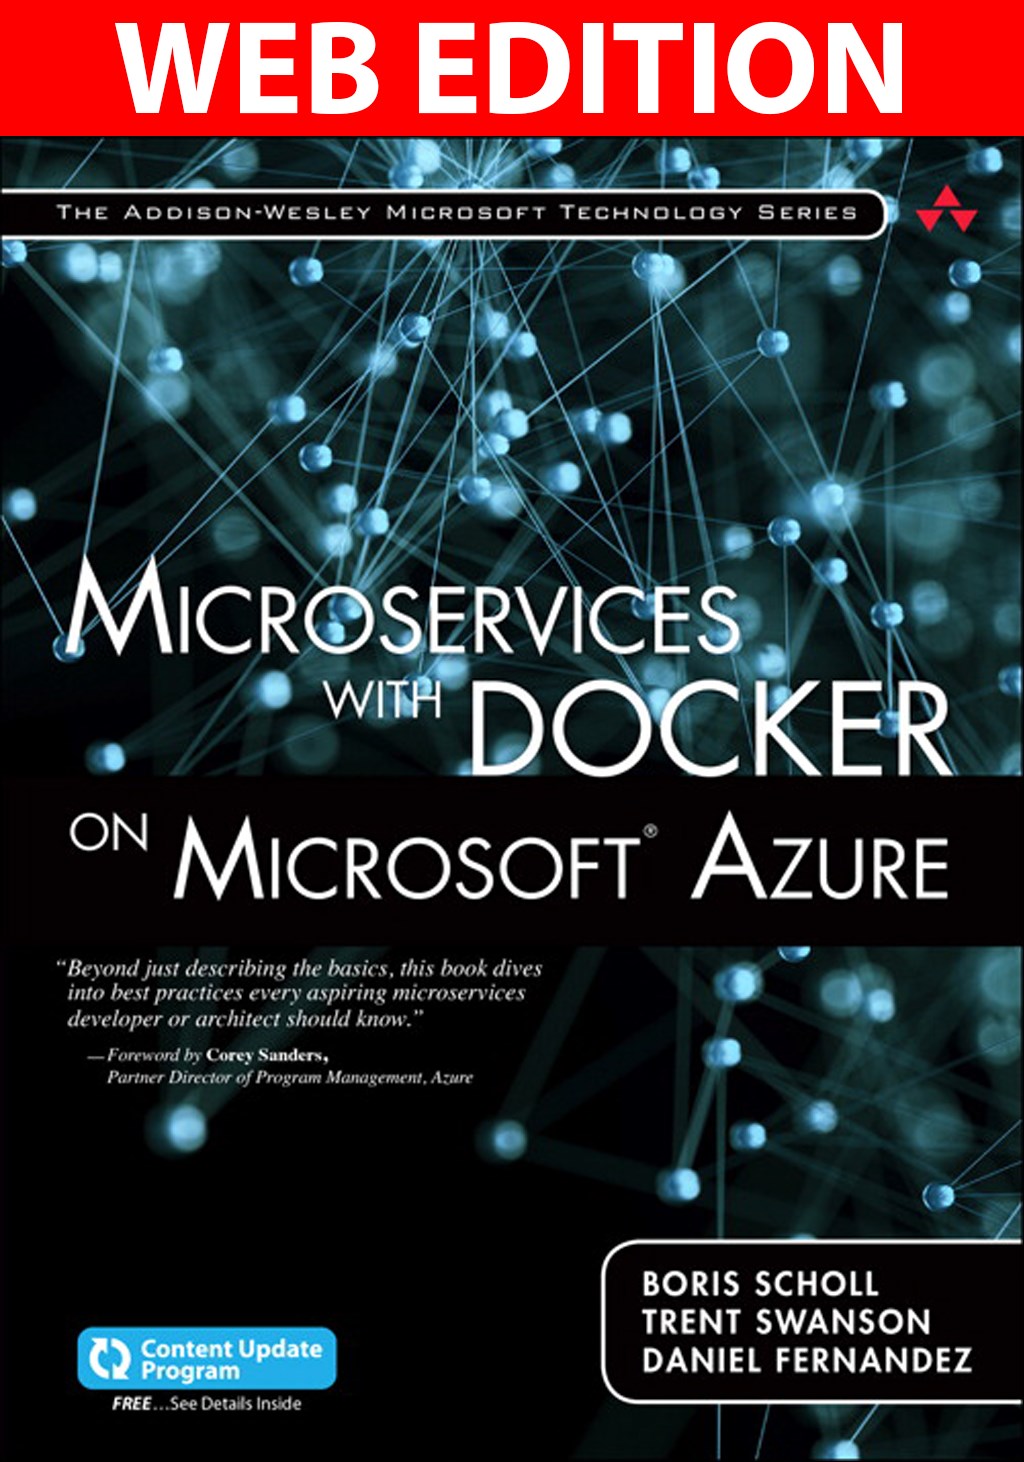 Microservices with Docker on Microsoft Azure (Web Edition and Content Update Program)